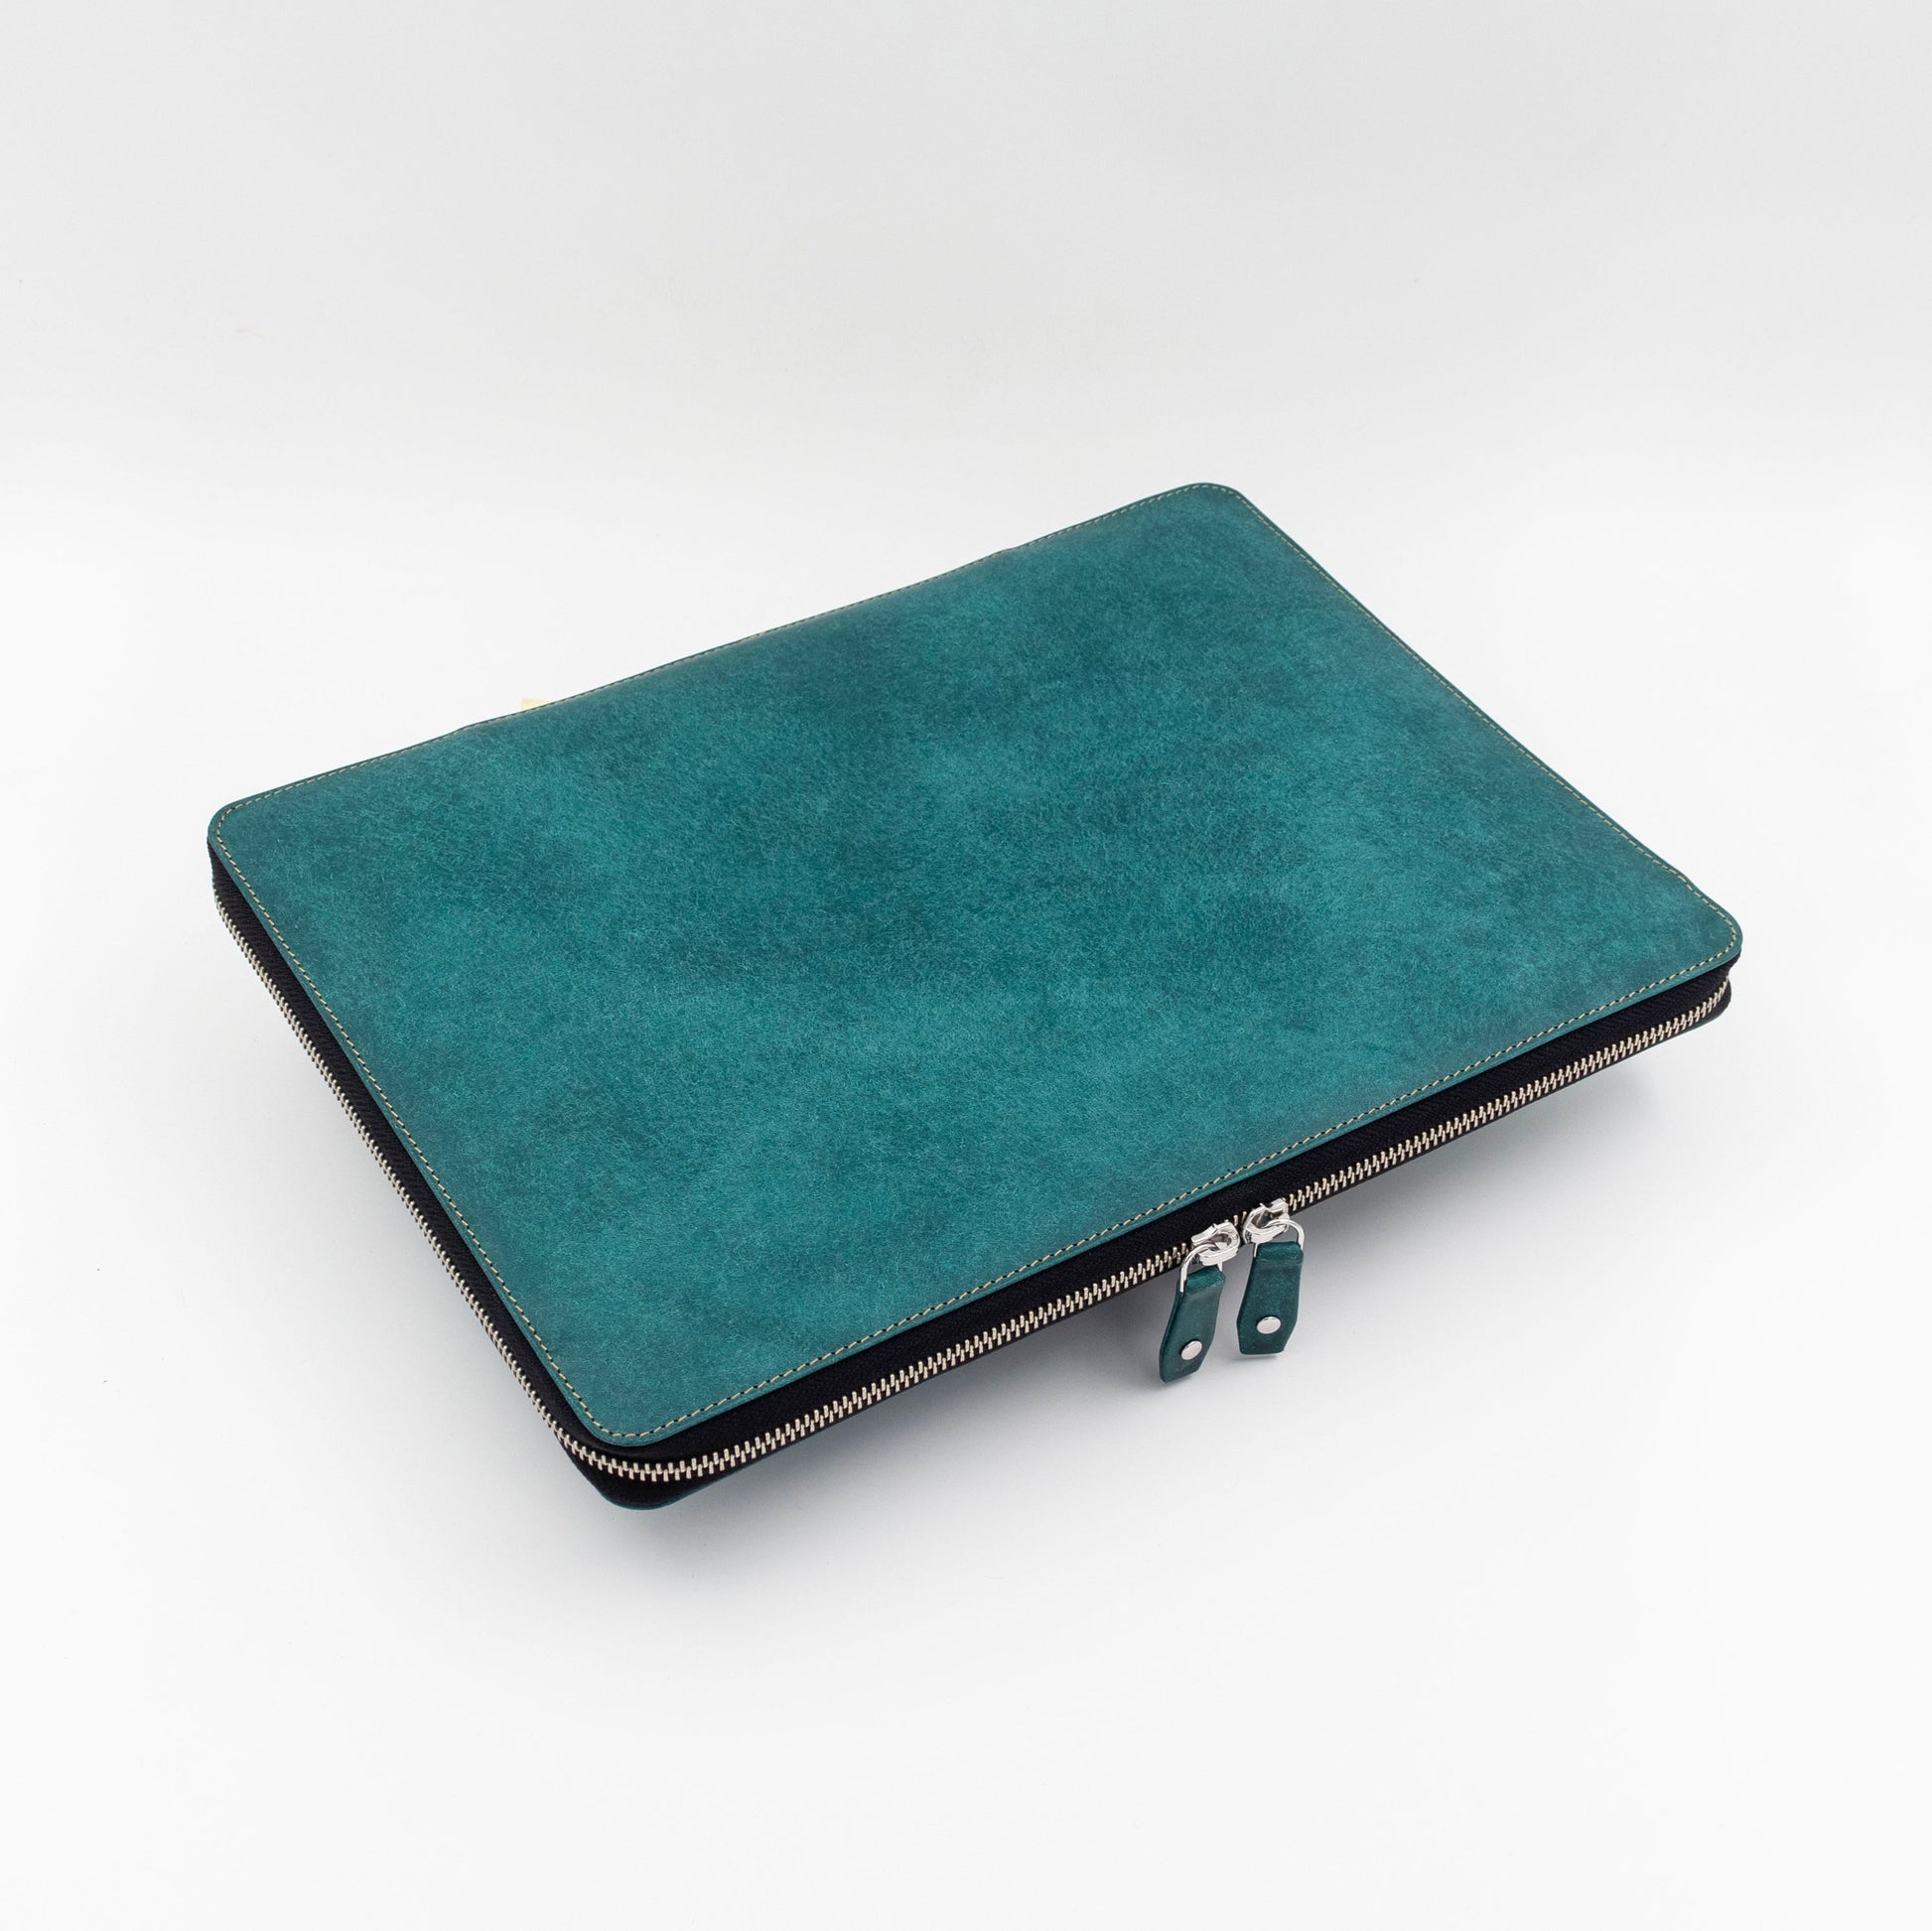 Leather cover for MacBook Pro in 13 or 15 inch